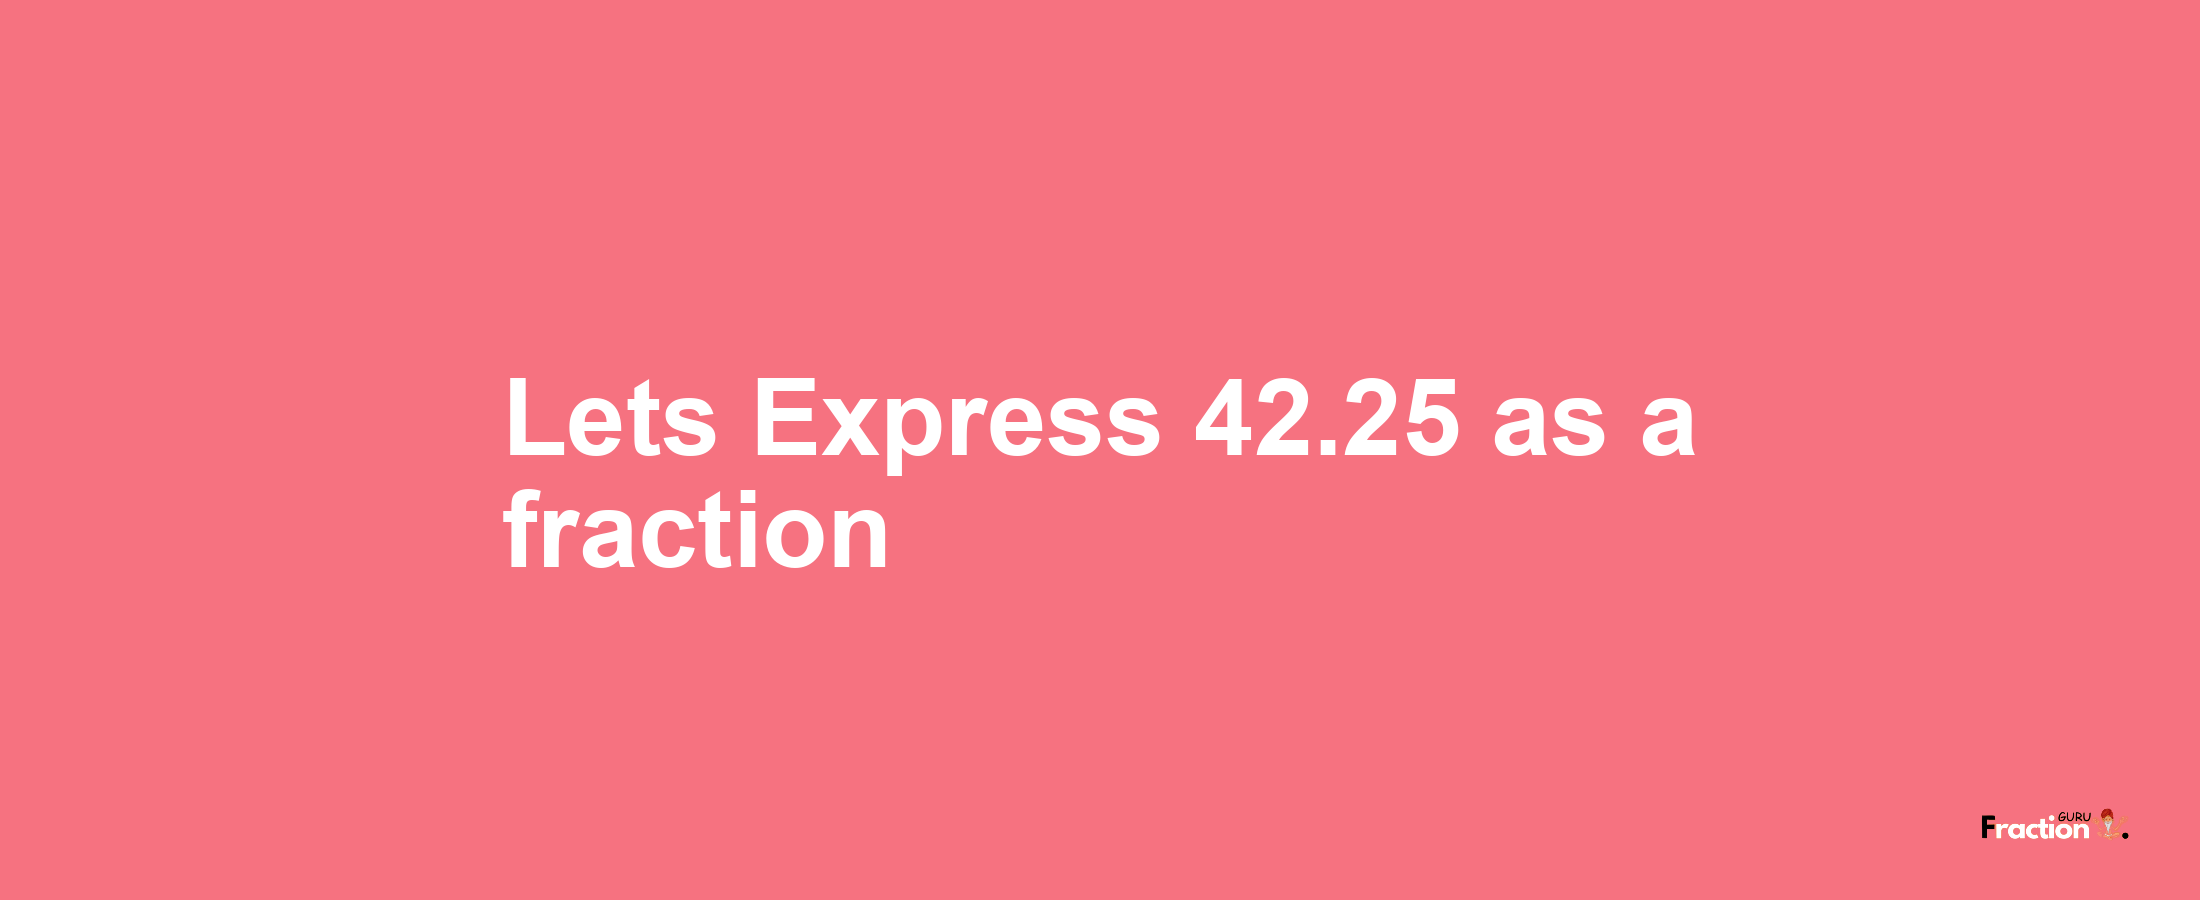 Lets Express 42.25 as afraction